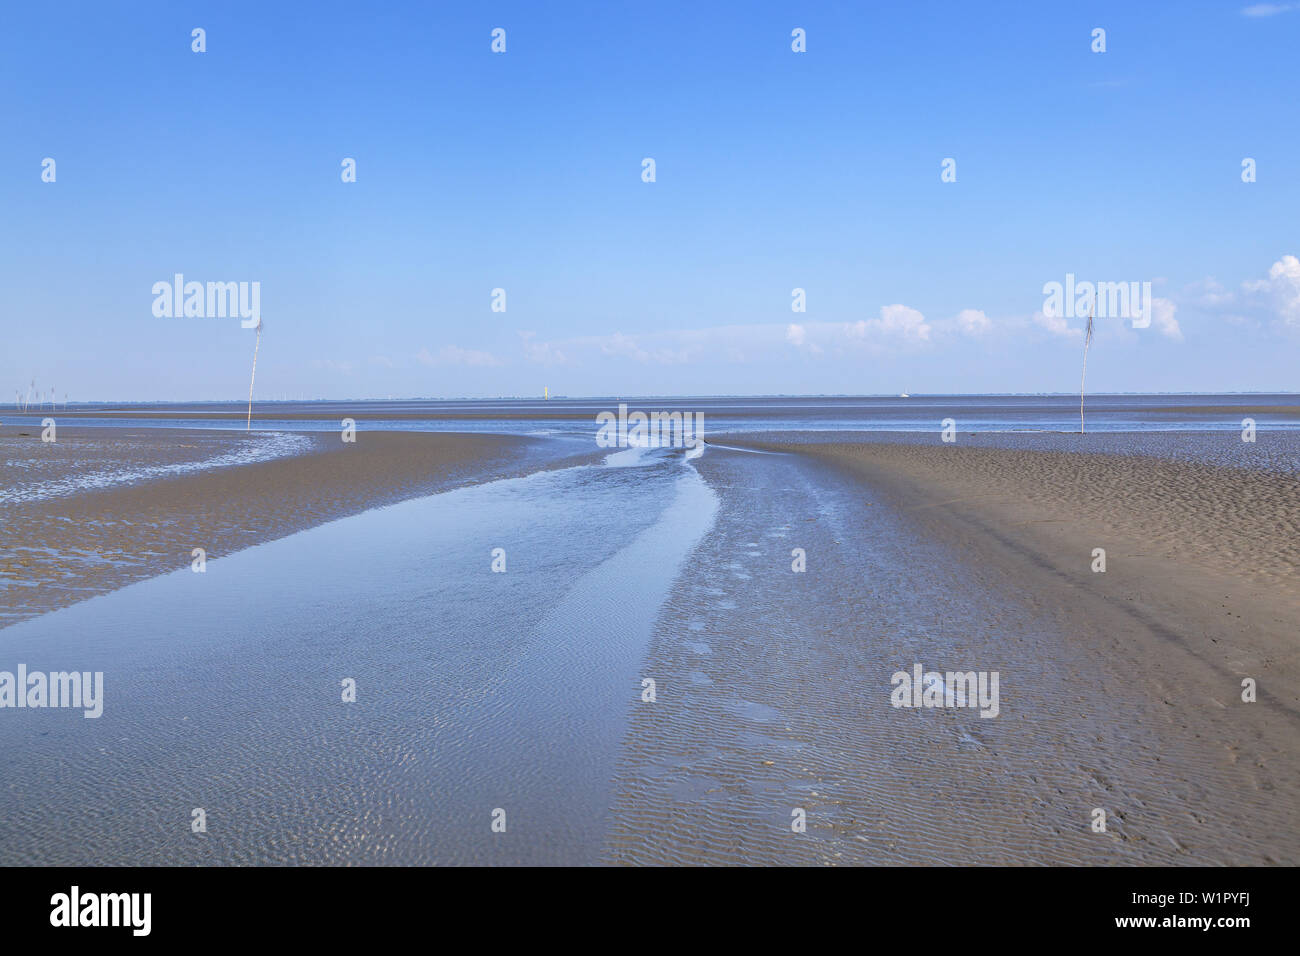 Varel Dangast High Resolution Stock Photography and Images - Alamy